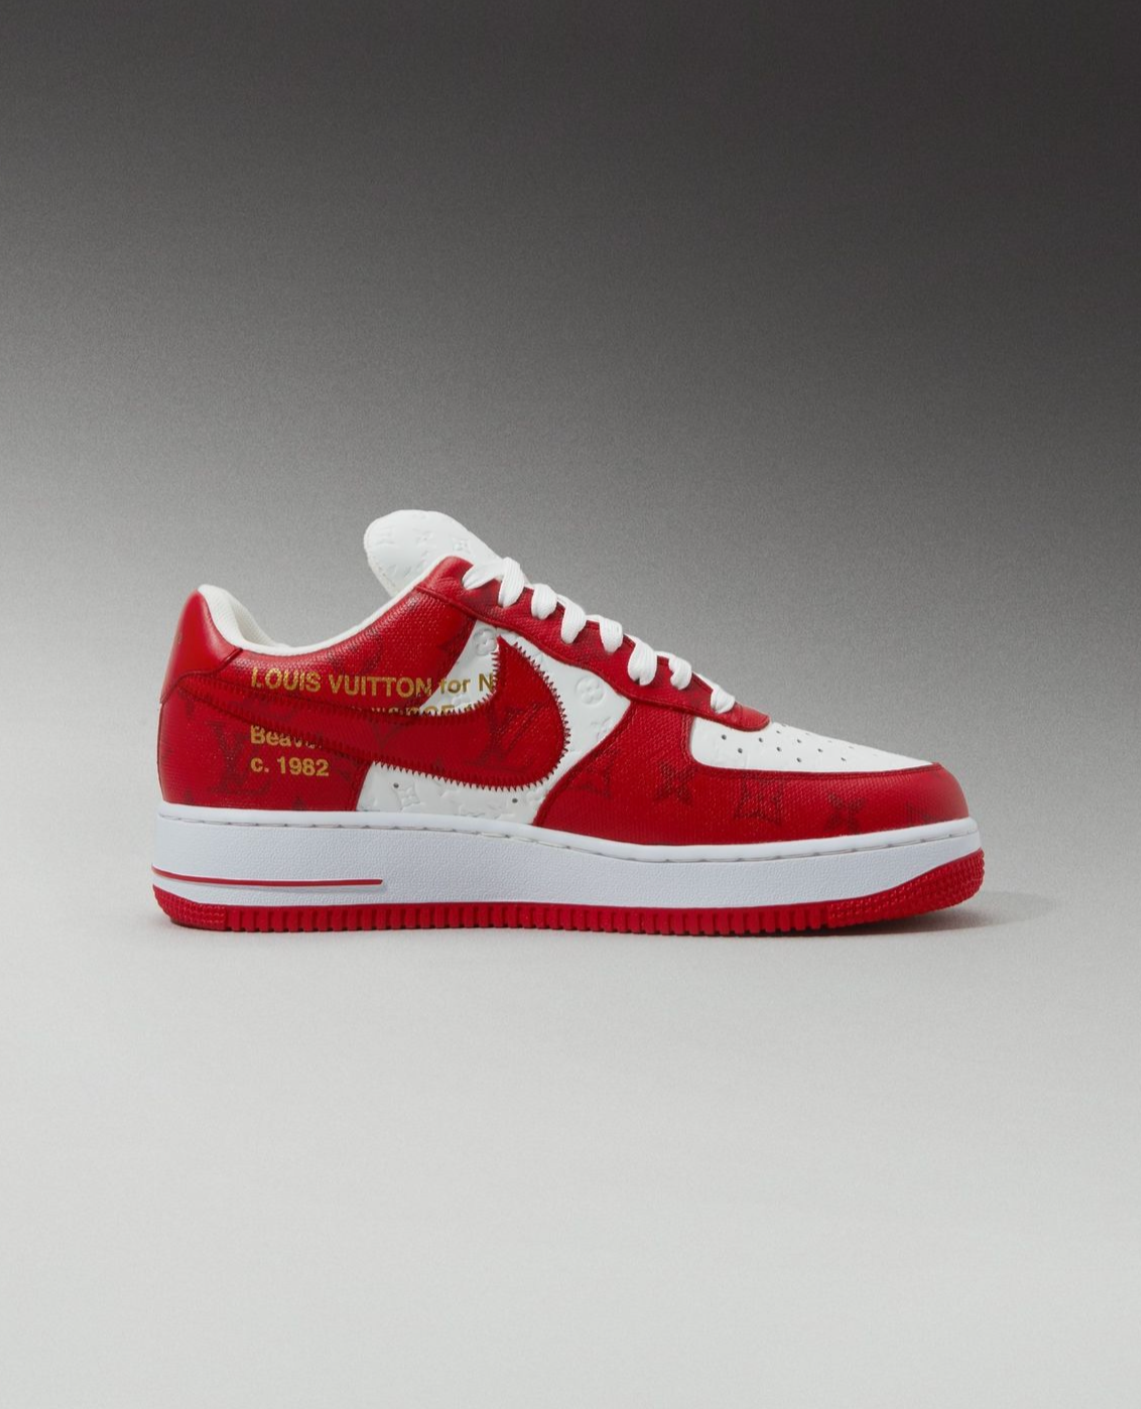 NIKE AIR FORCE 1 LOW X LOUIS VUITTON BY VIRGIL ABLOH WHITE RED